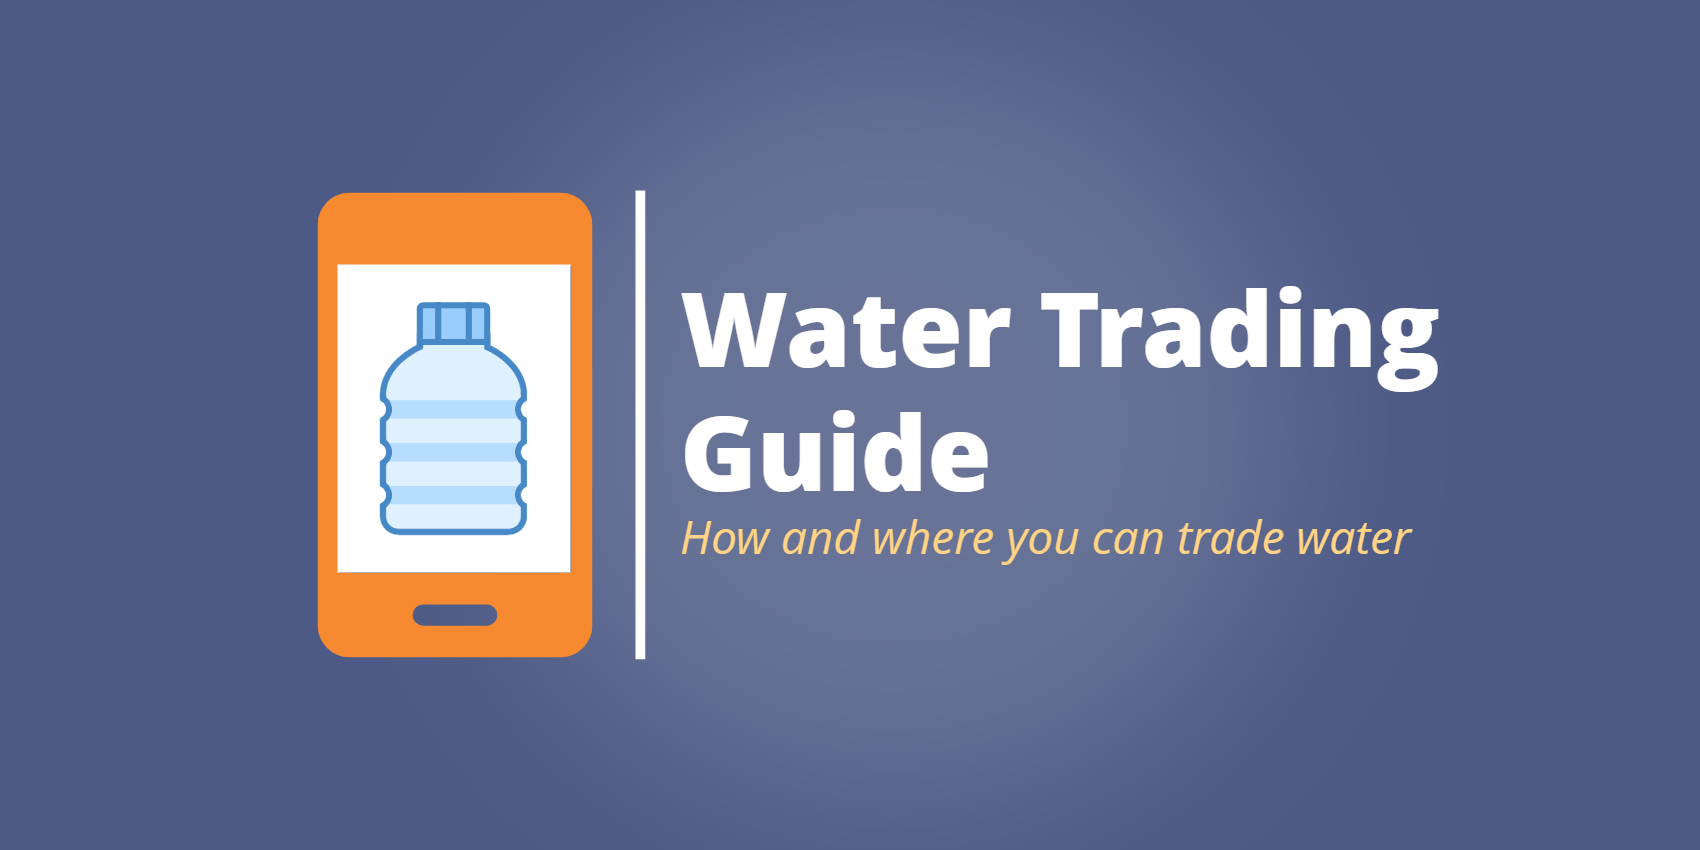 Water Trading In 2022: Ways To Trade Water With Regulated Brokers